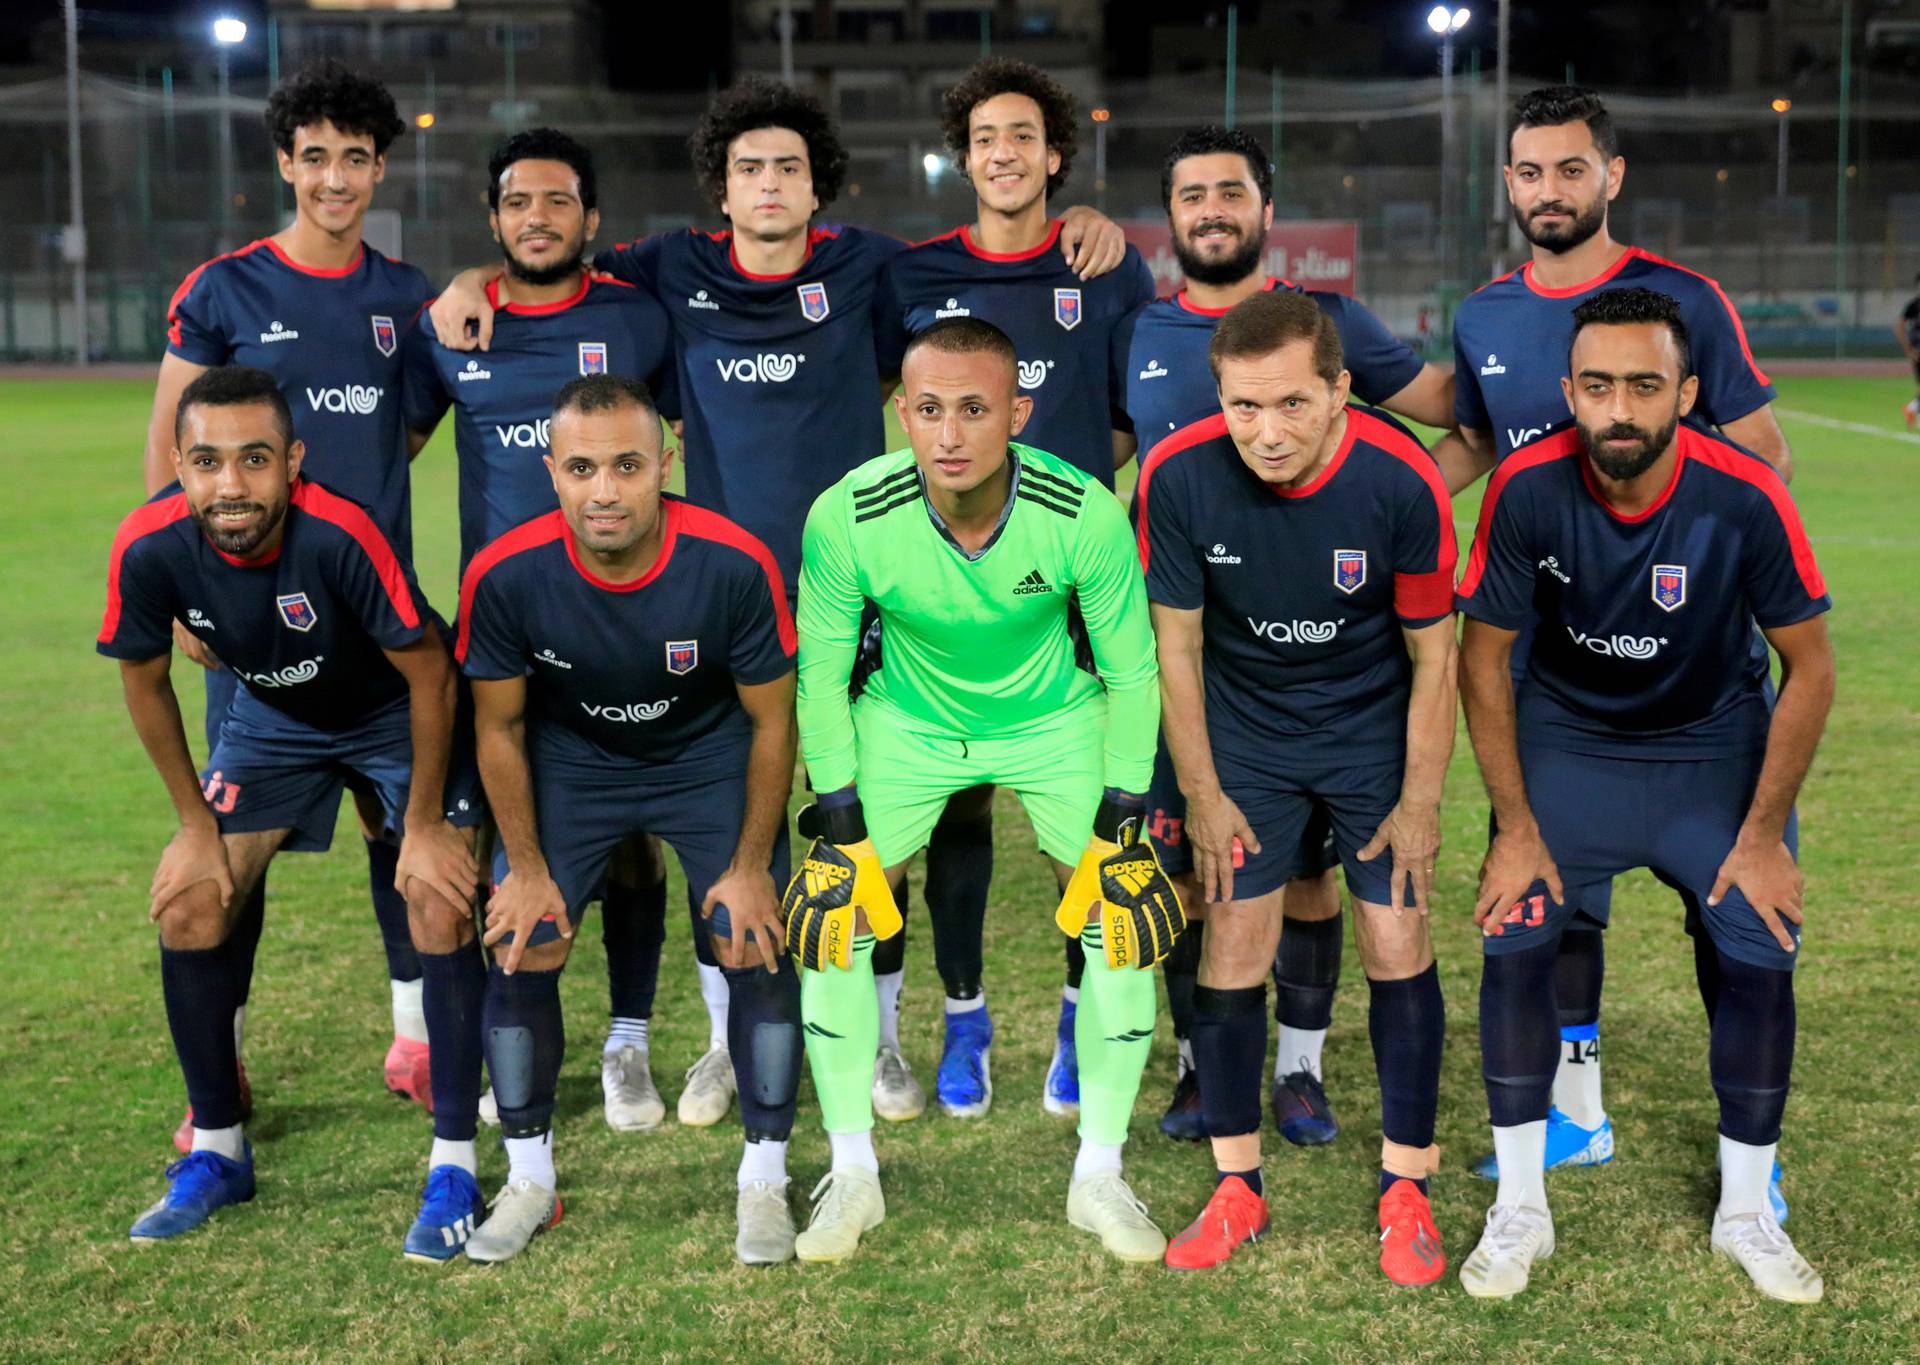 Ezzeldin Bahader (2nd R), a 74-years-old Egyptian football player of 6th October Club poses for a team group photo before a soccer match against El Ayat Sports Club of Egypt's third division league at the Olympic Stadium in the Cairo suburb of Maadi